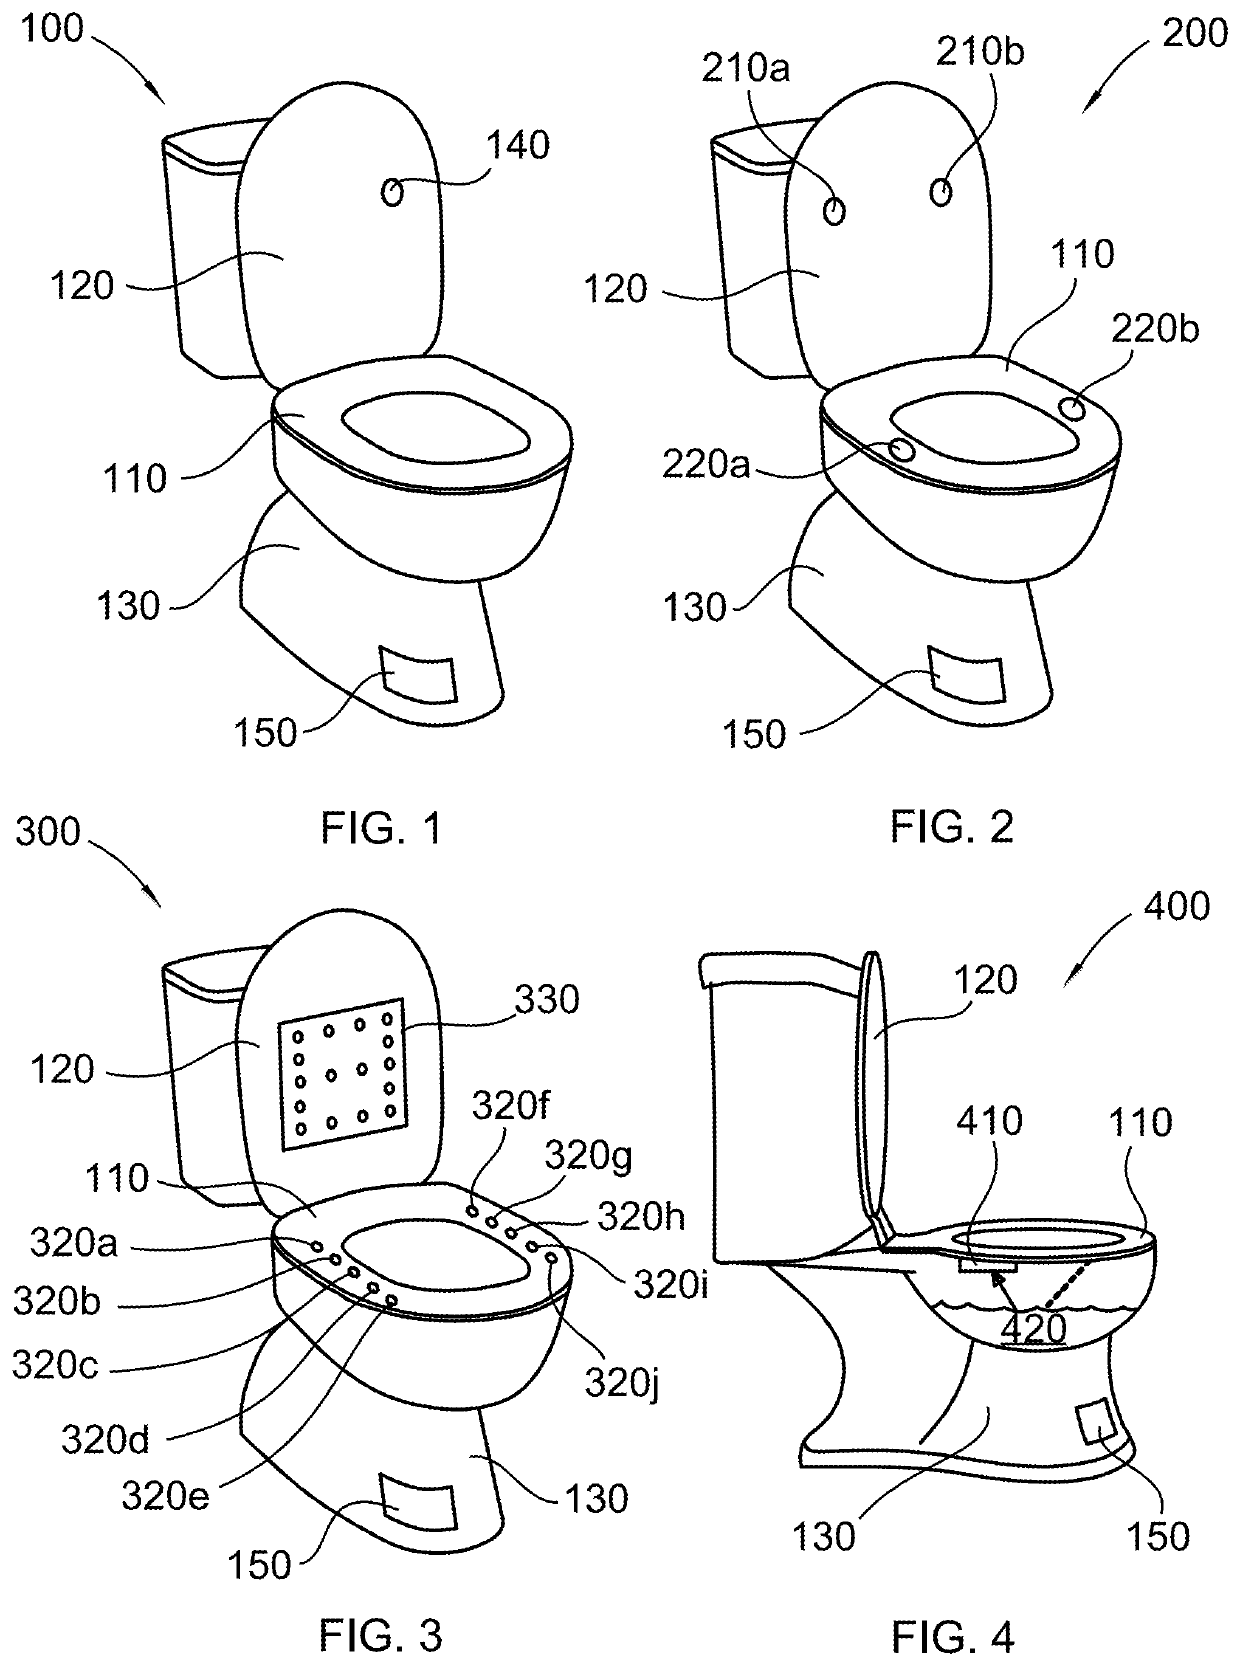 Medical toilet with acoustic transducers for collecting health-related measurements